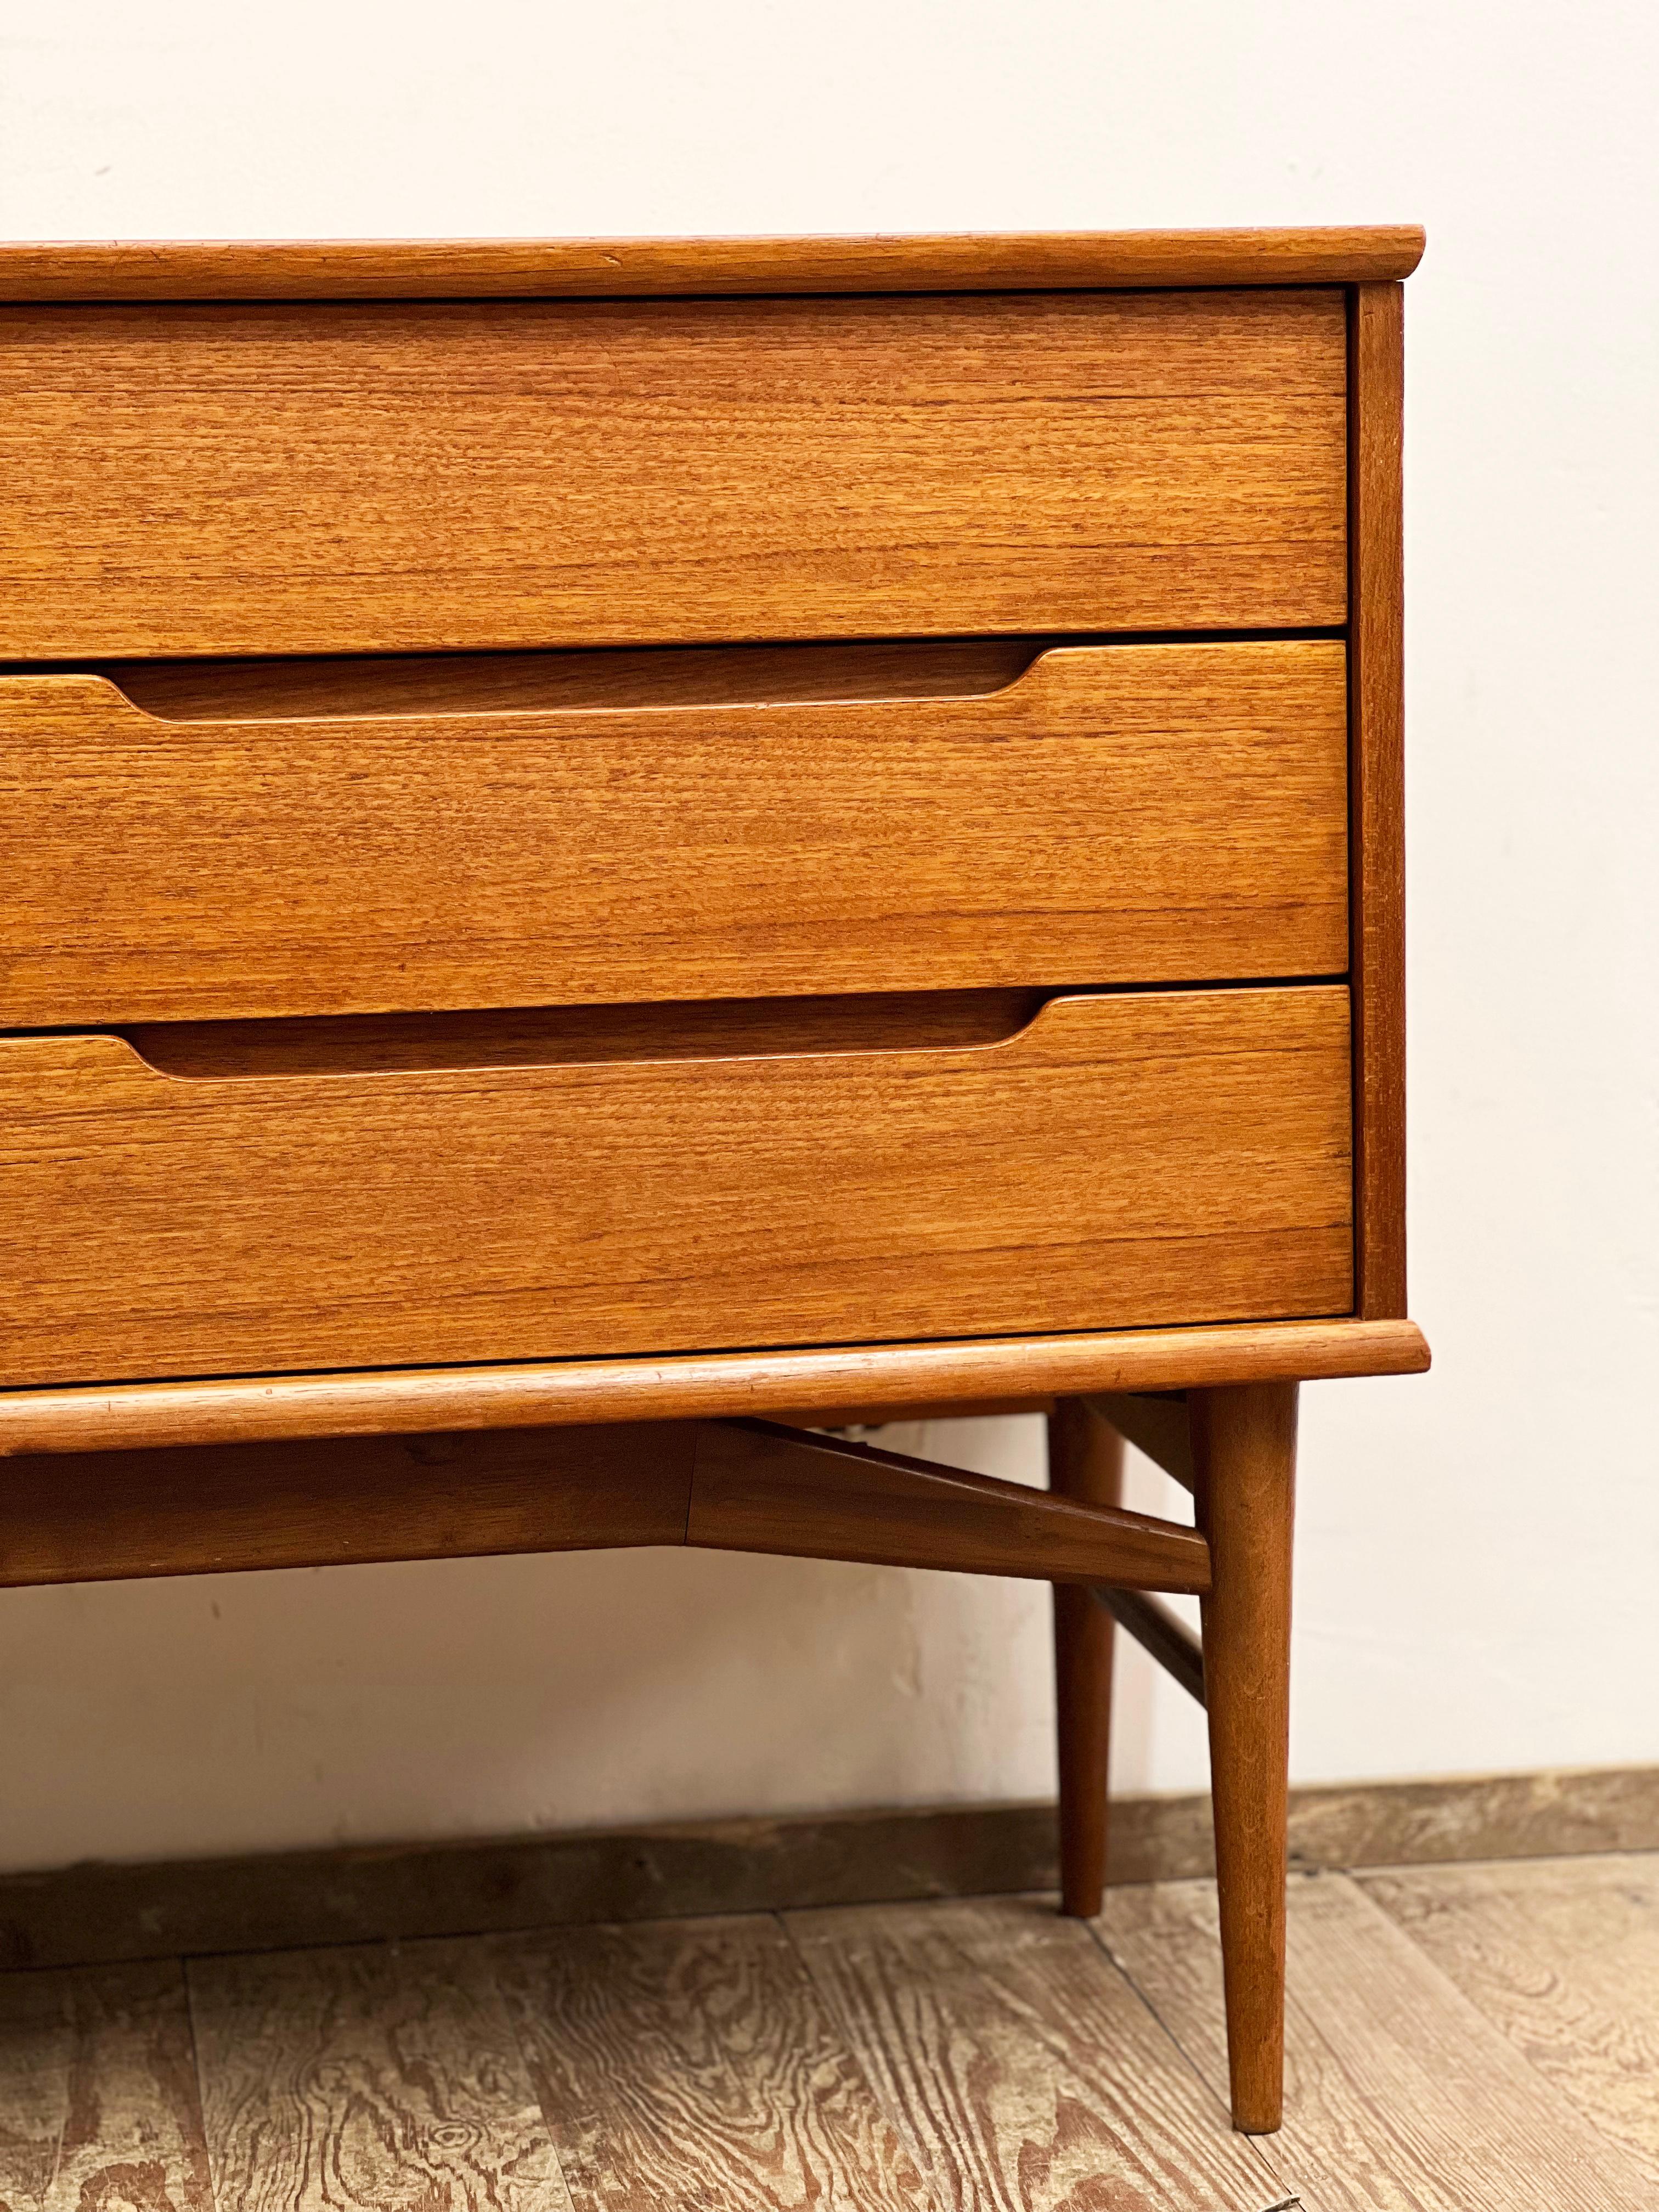 Small Mid-Century Modern Fredericia Sideboard in Teak, Germany, 1950s For Sale 6